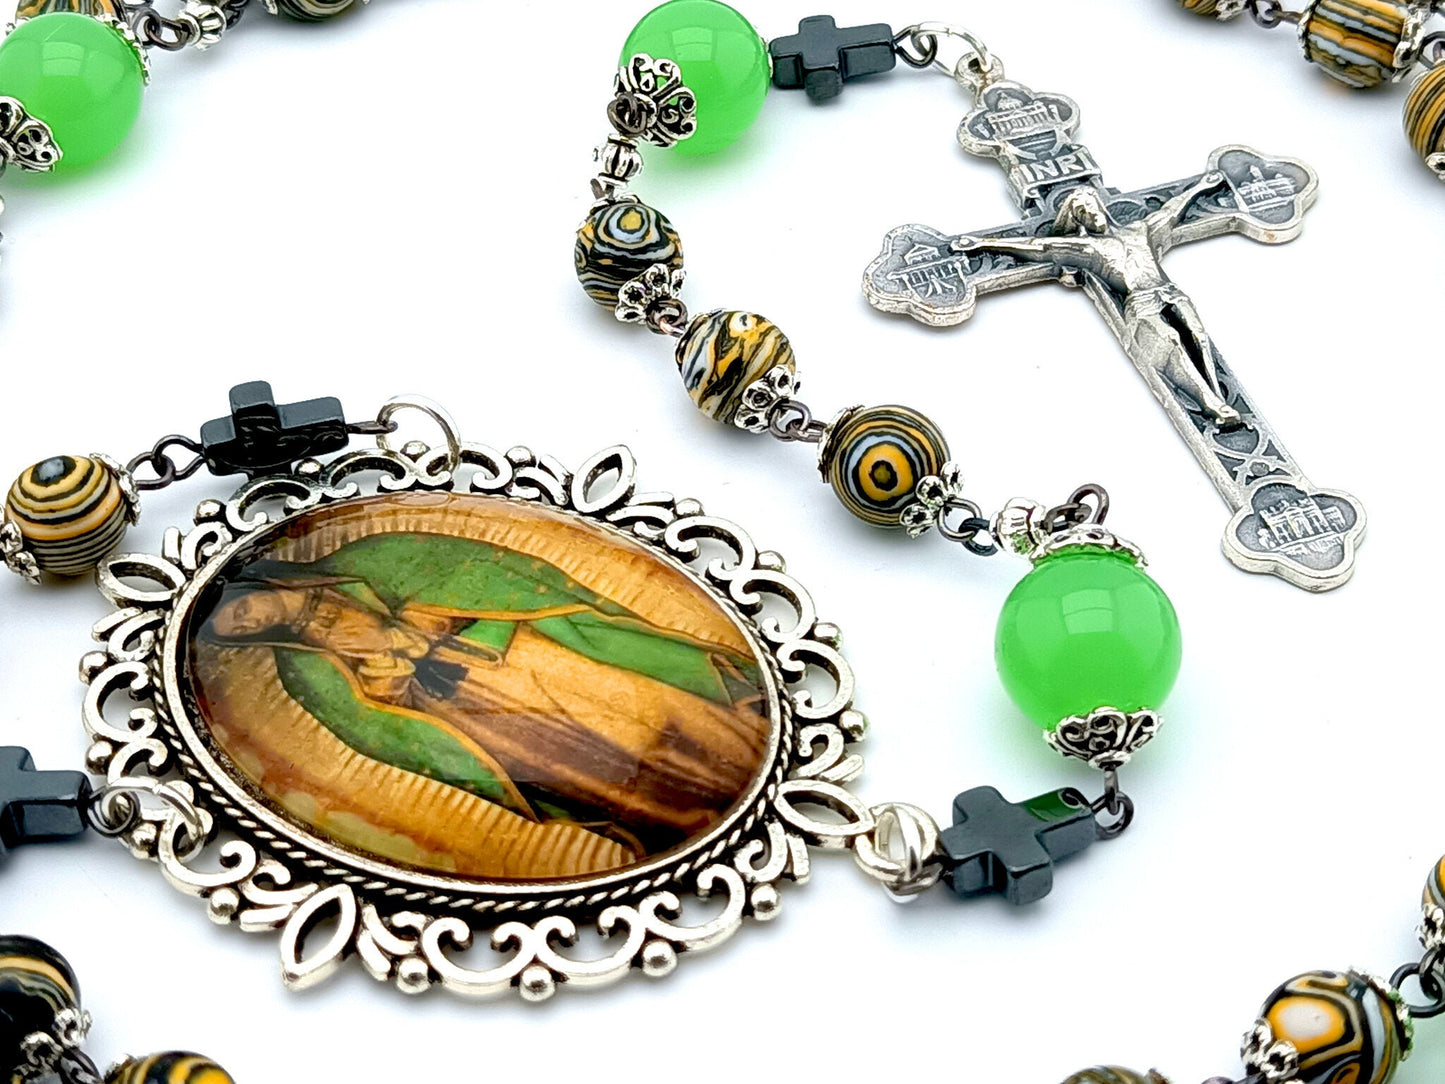 Our Lady of Guadalupe unique rosary beads with malachite gemstone beads, jade pater beads, silver crucifix and picture centre medal.